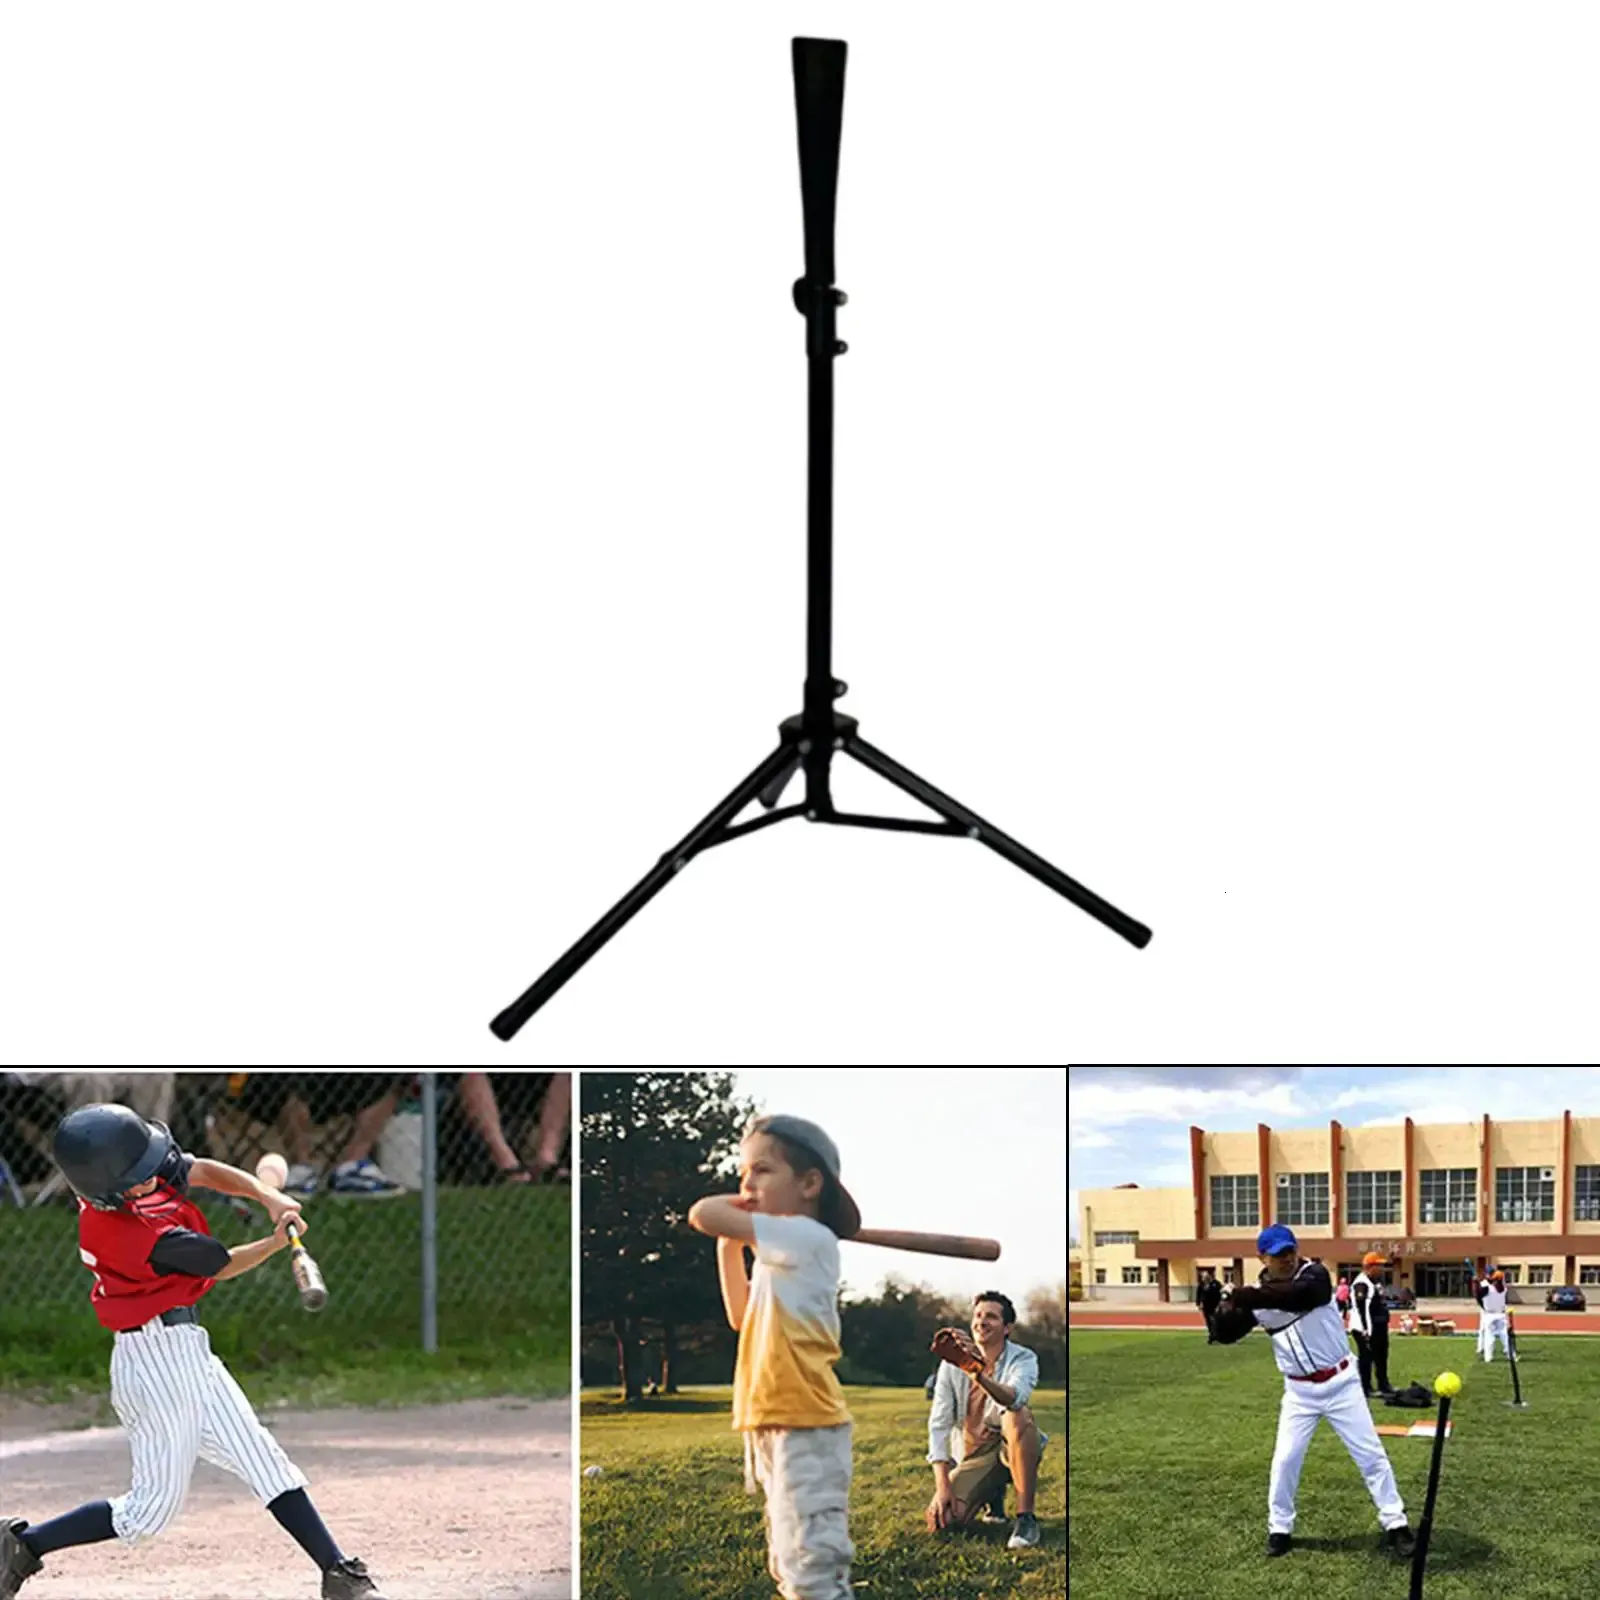 Baseball Softball Batting Tee Portable Practice Exercise Equipment Trainer Tee Stand for Indoor Men Swing Lunging Training